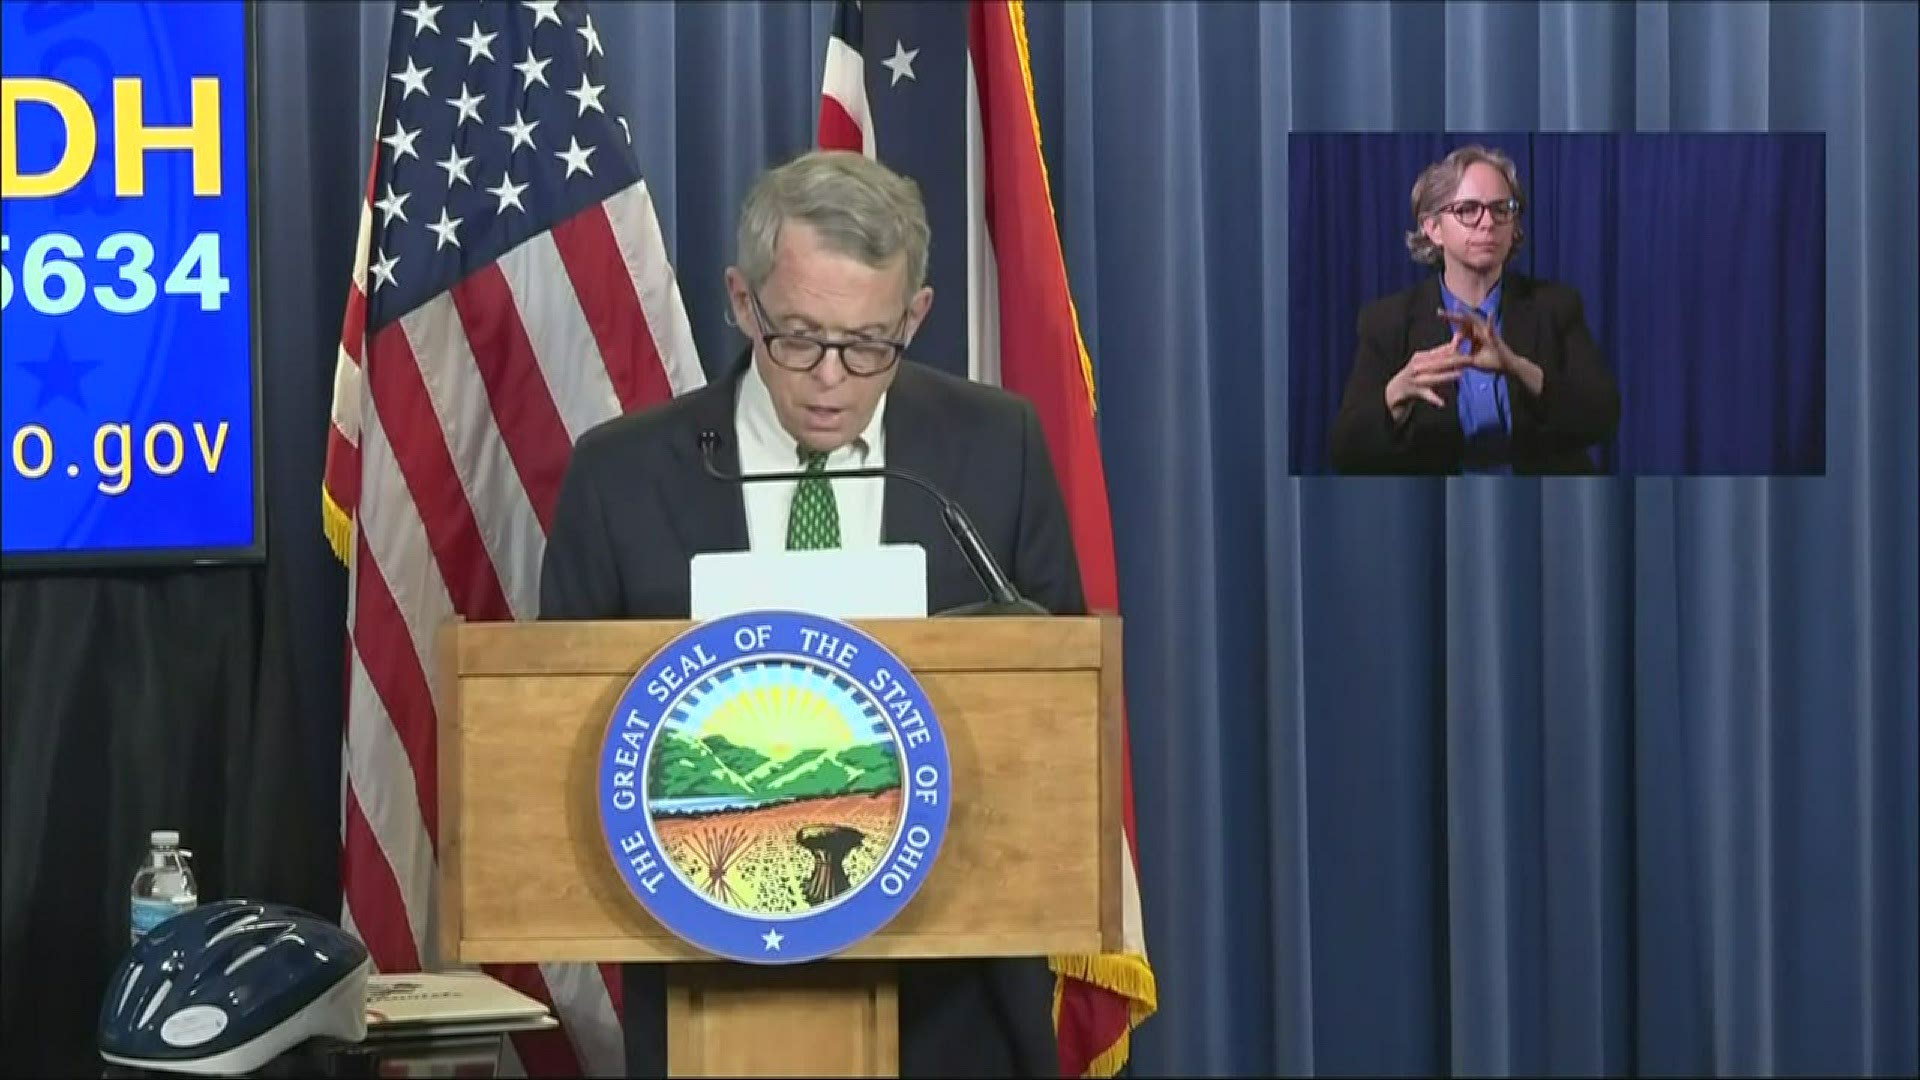 DeWine said that visitation will be reopened in stages. 'We are not to nursing homes yet,' he said.